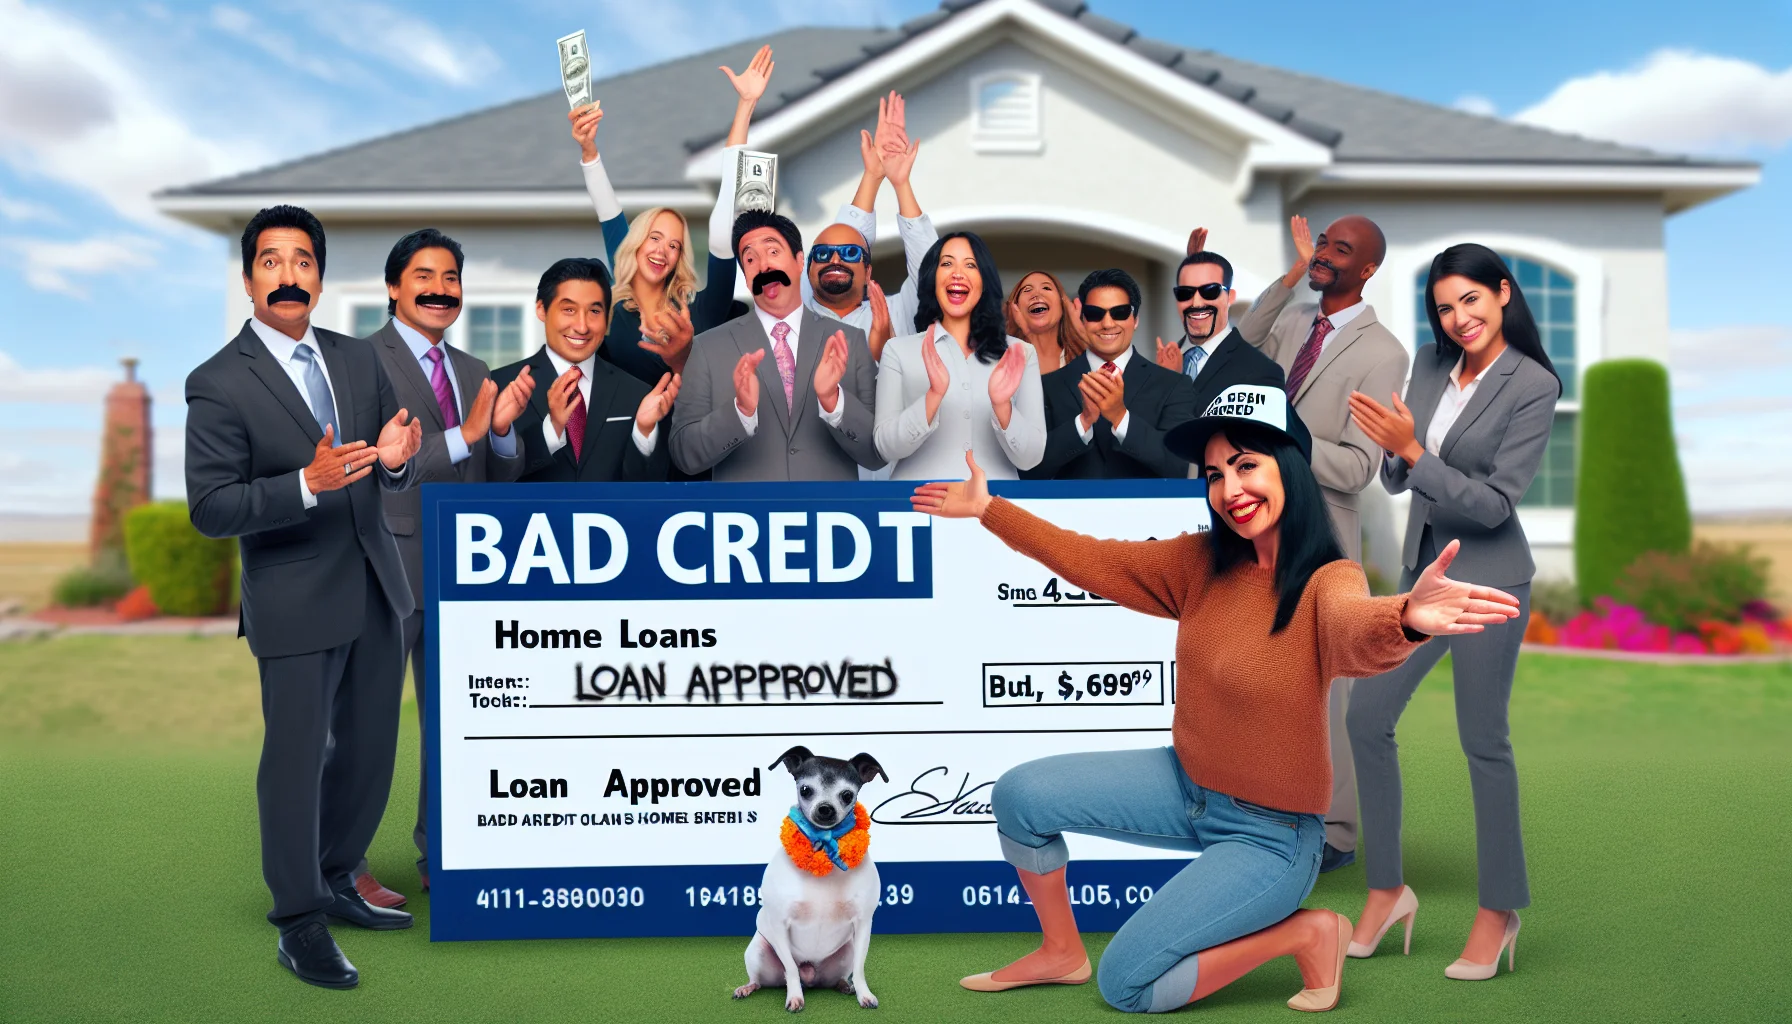 Create a humorous and lifelike scene showcasing the best possible scenario of bad credit home loans in the field of real estate. Picture this: A joyful middle-aged Hispanic woman, holding an oversized cheque with the inscription 'Bad Credit Home Loan Approval'. Put an opulent house in the background, complete with a sold sign on the front yard. Also, include a diverse group of happy real estate agents from varying descents: South Asian, Black, and Middle-Eastern, all clapping and celebrating. For a final touch of humour, place a dog dancing on its hind legs, wearing a cap that says 'Loan Approved'.